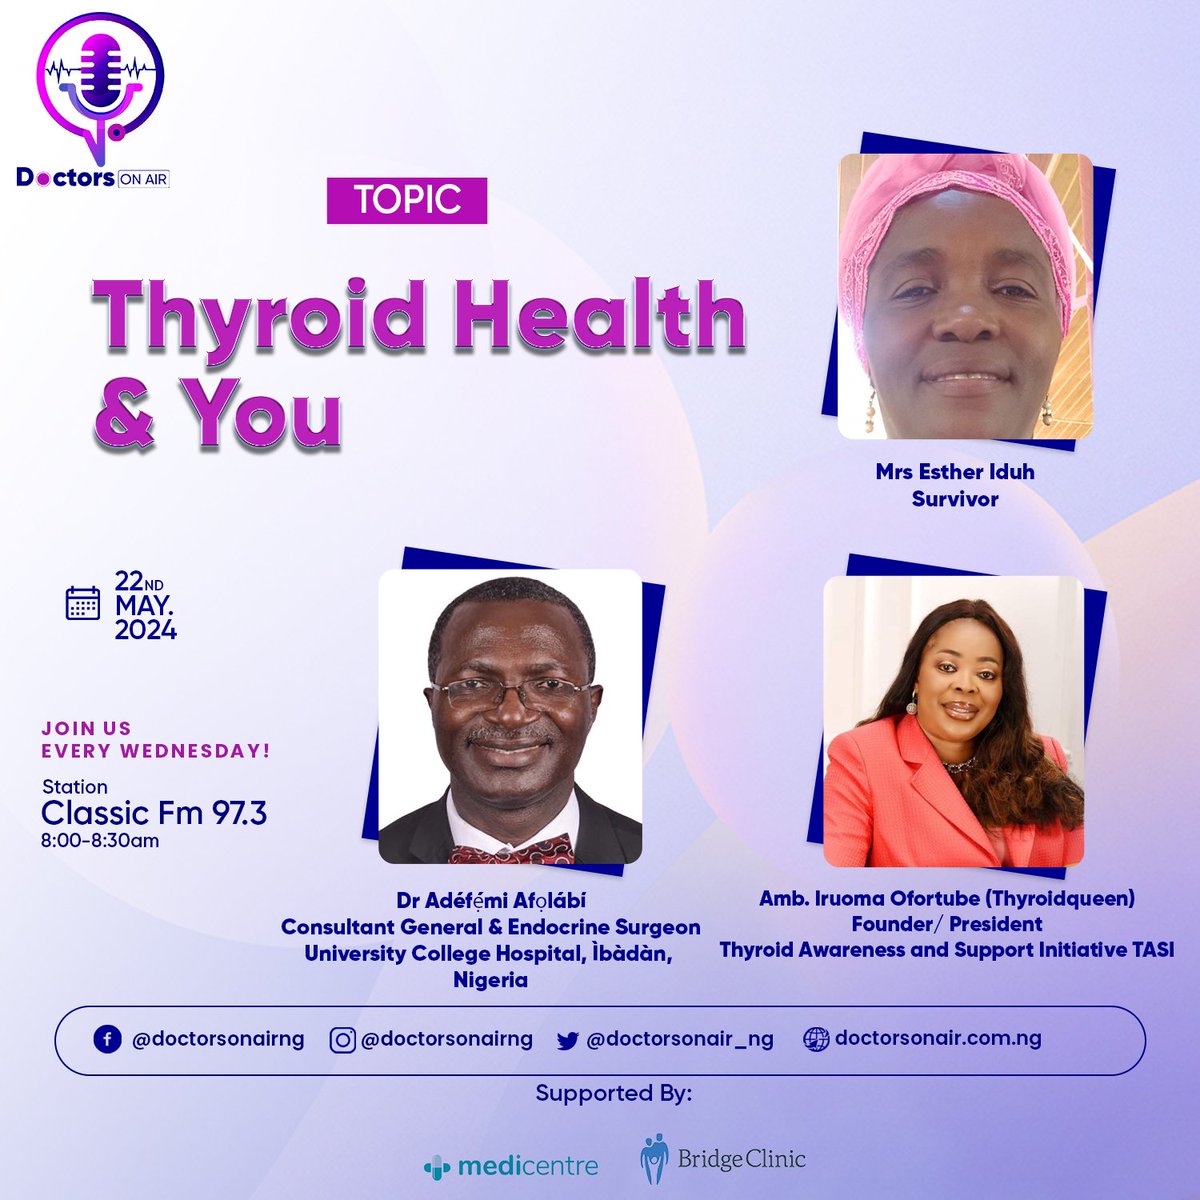 Thyroid disease is a non-communicable disease. However, in Nigeria, people have handled it as such with so much stigma and negativity. On tomorrow's episode of Doctors on Air, Dr. Pamela will be addressing this very important topic- “Thyroid Health & You,'